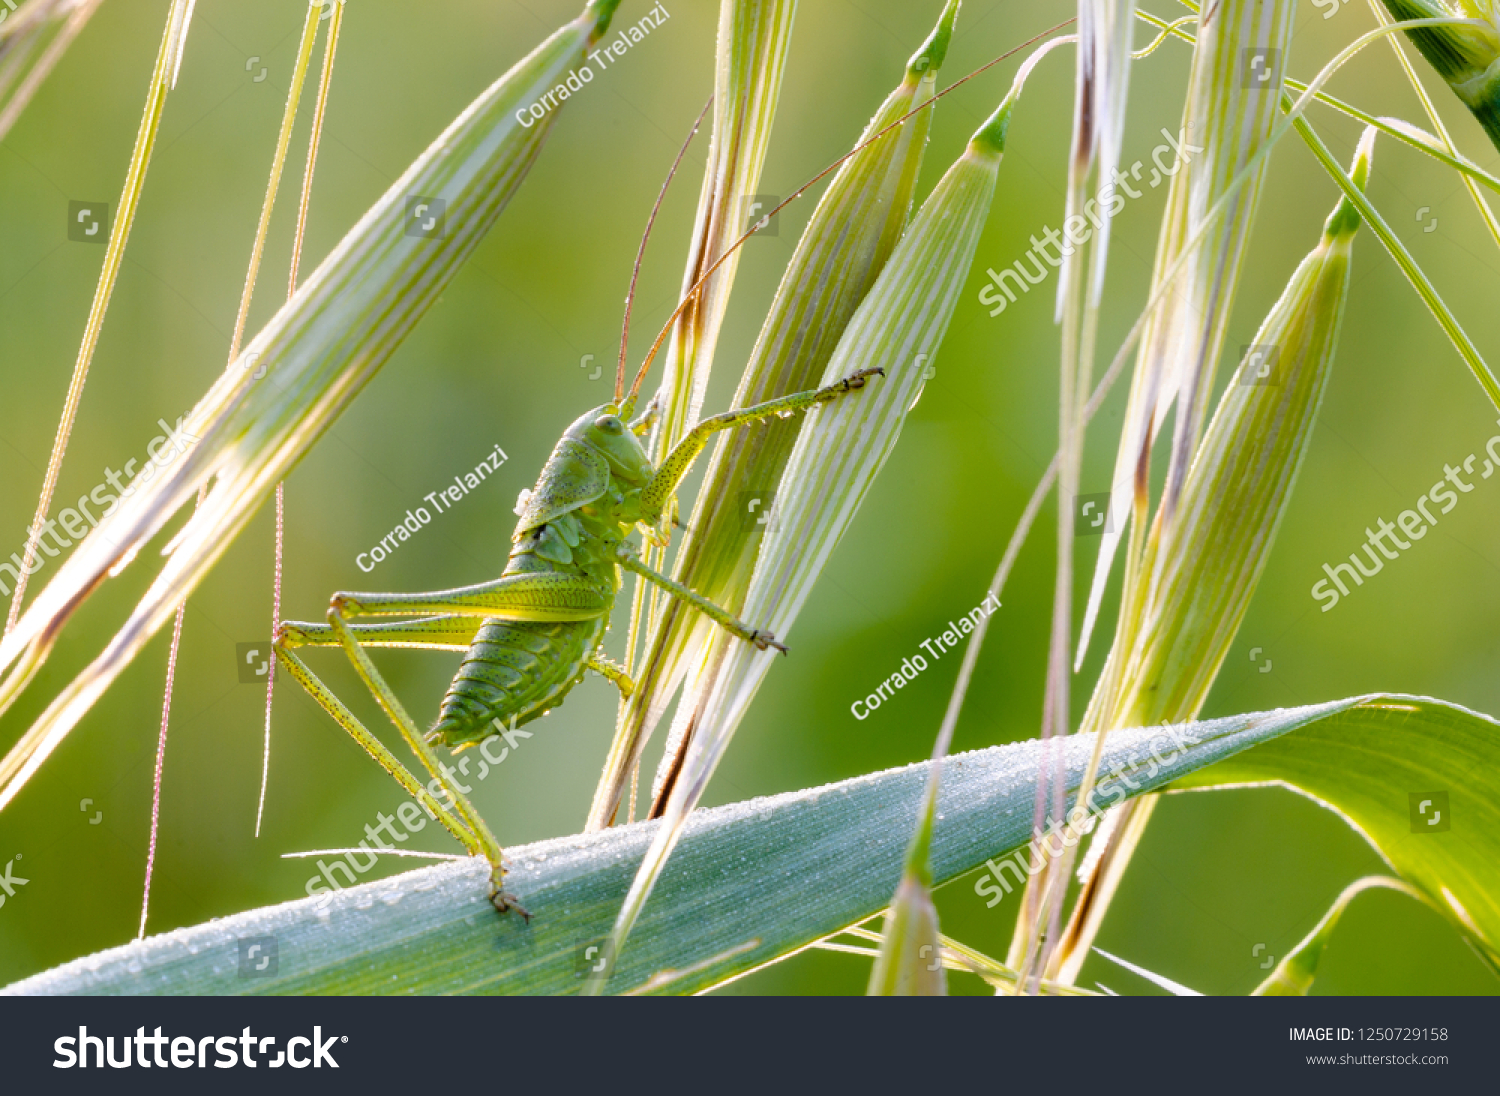 Green cricket in the fresh grass under first rays of the morning sun, dawn light, dawn patrol #1250729158